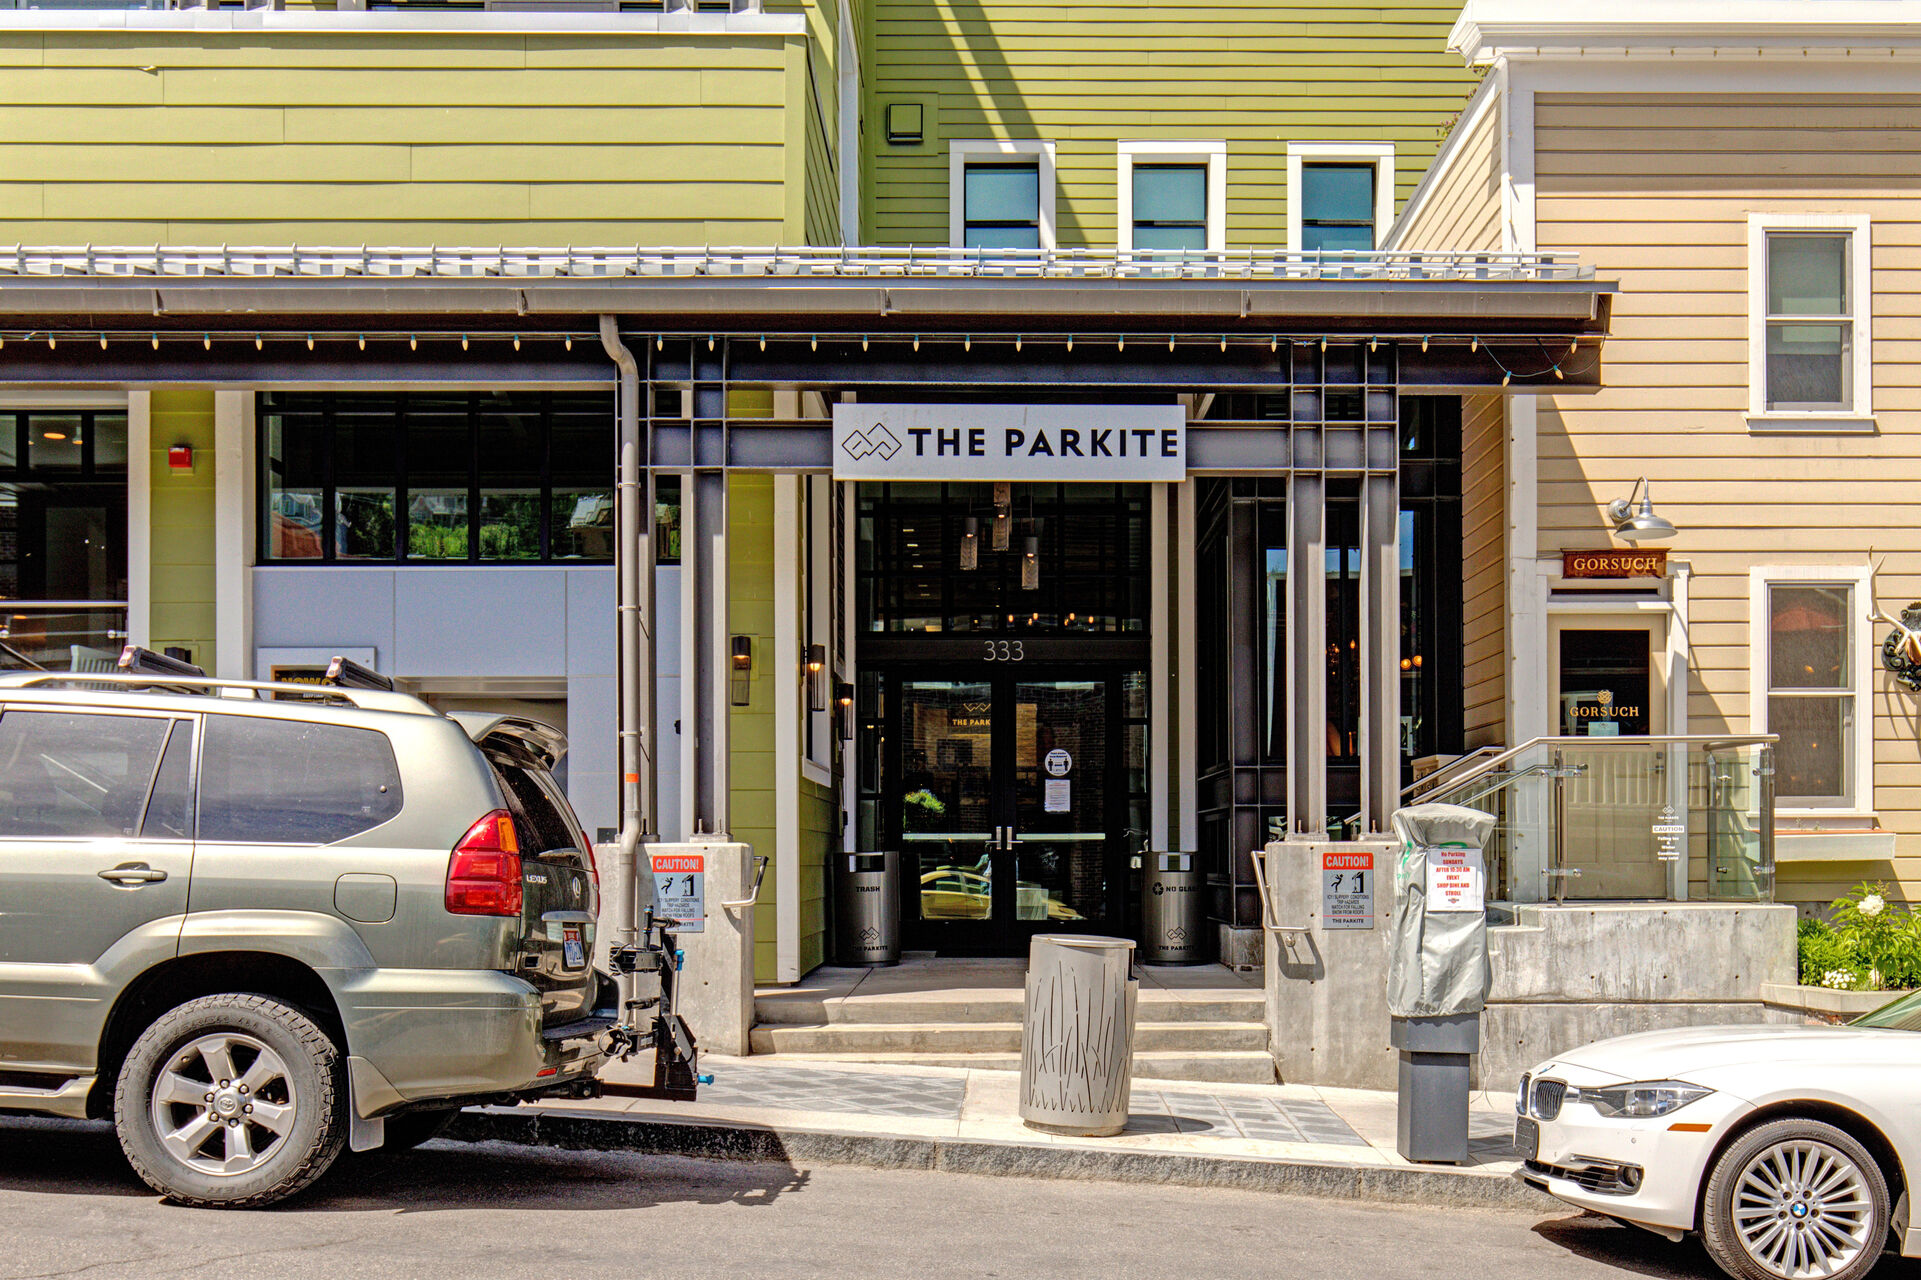 The Parkite Condominiums Located Right on Main Street in the Heart of Old Town